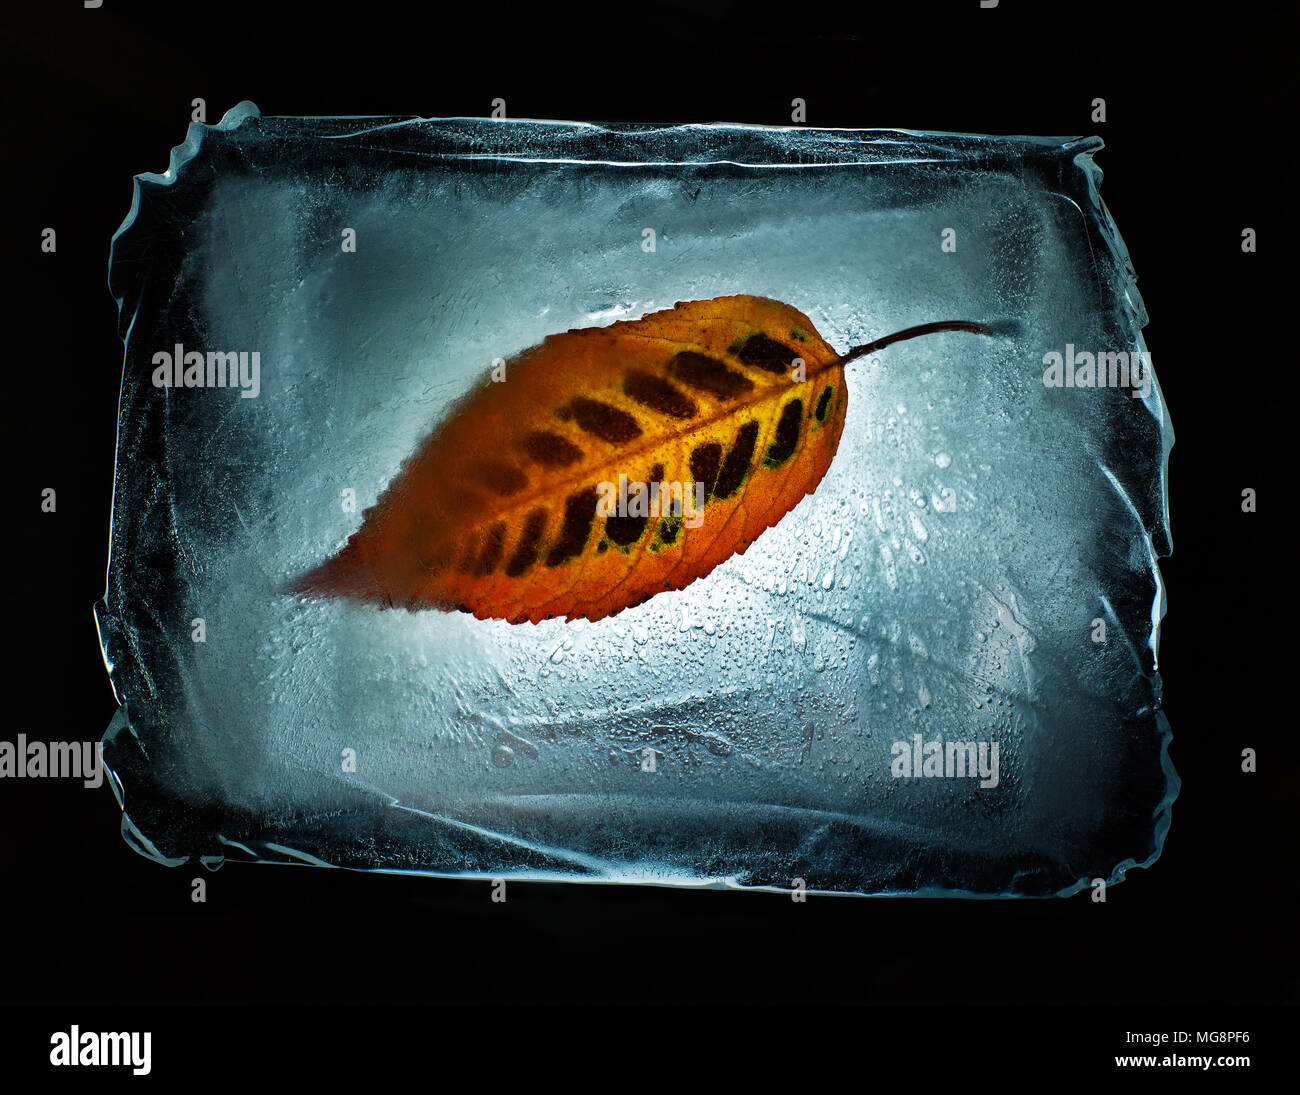 A leaf encapsulated in ice Stock Photo